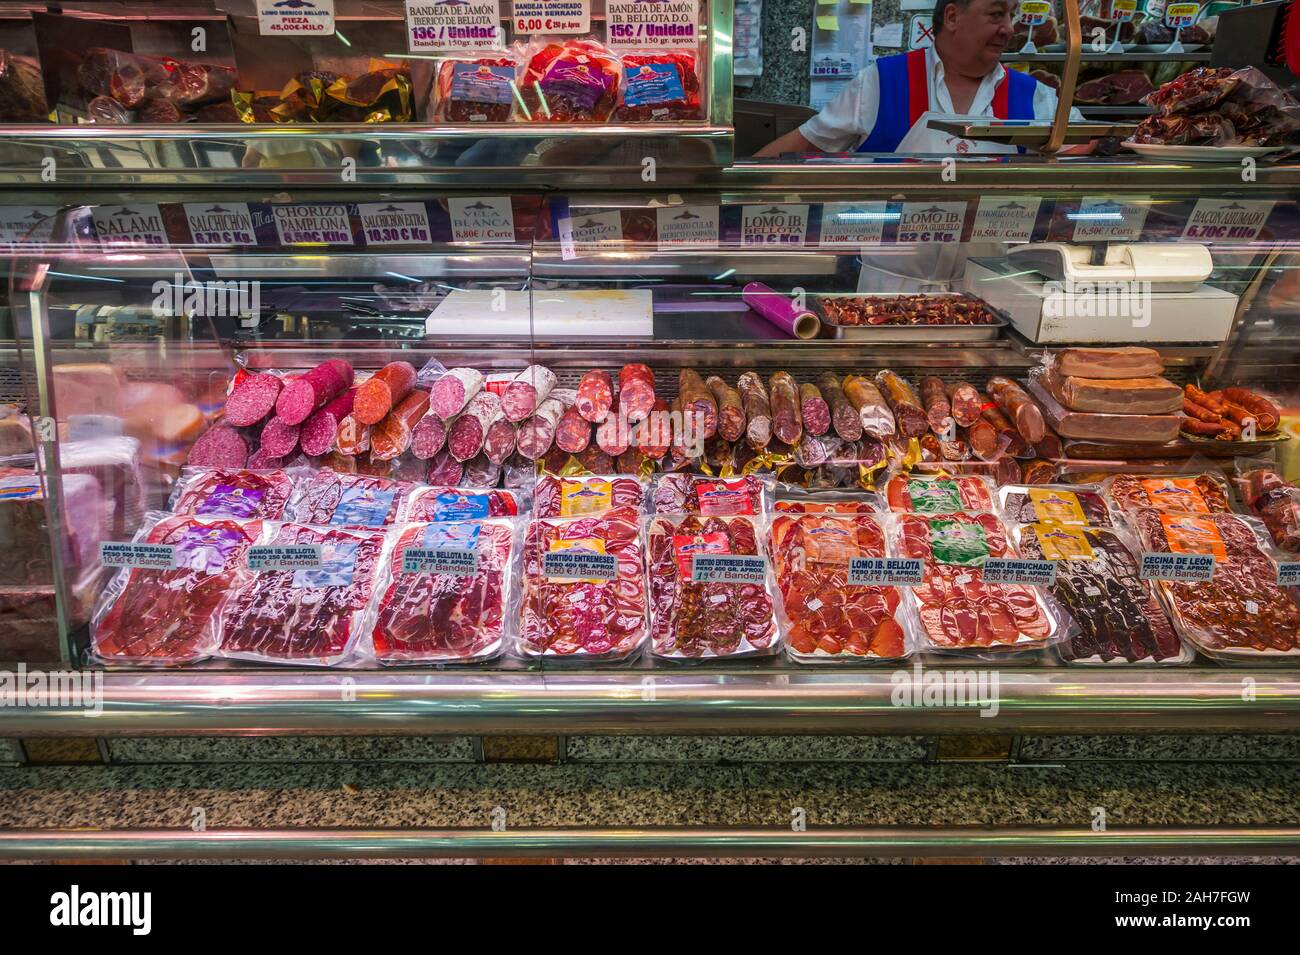 A Charcuterie in Madrid, Spain Stock Photo